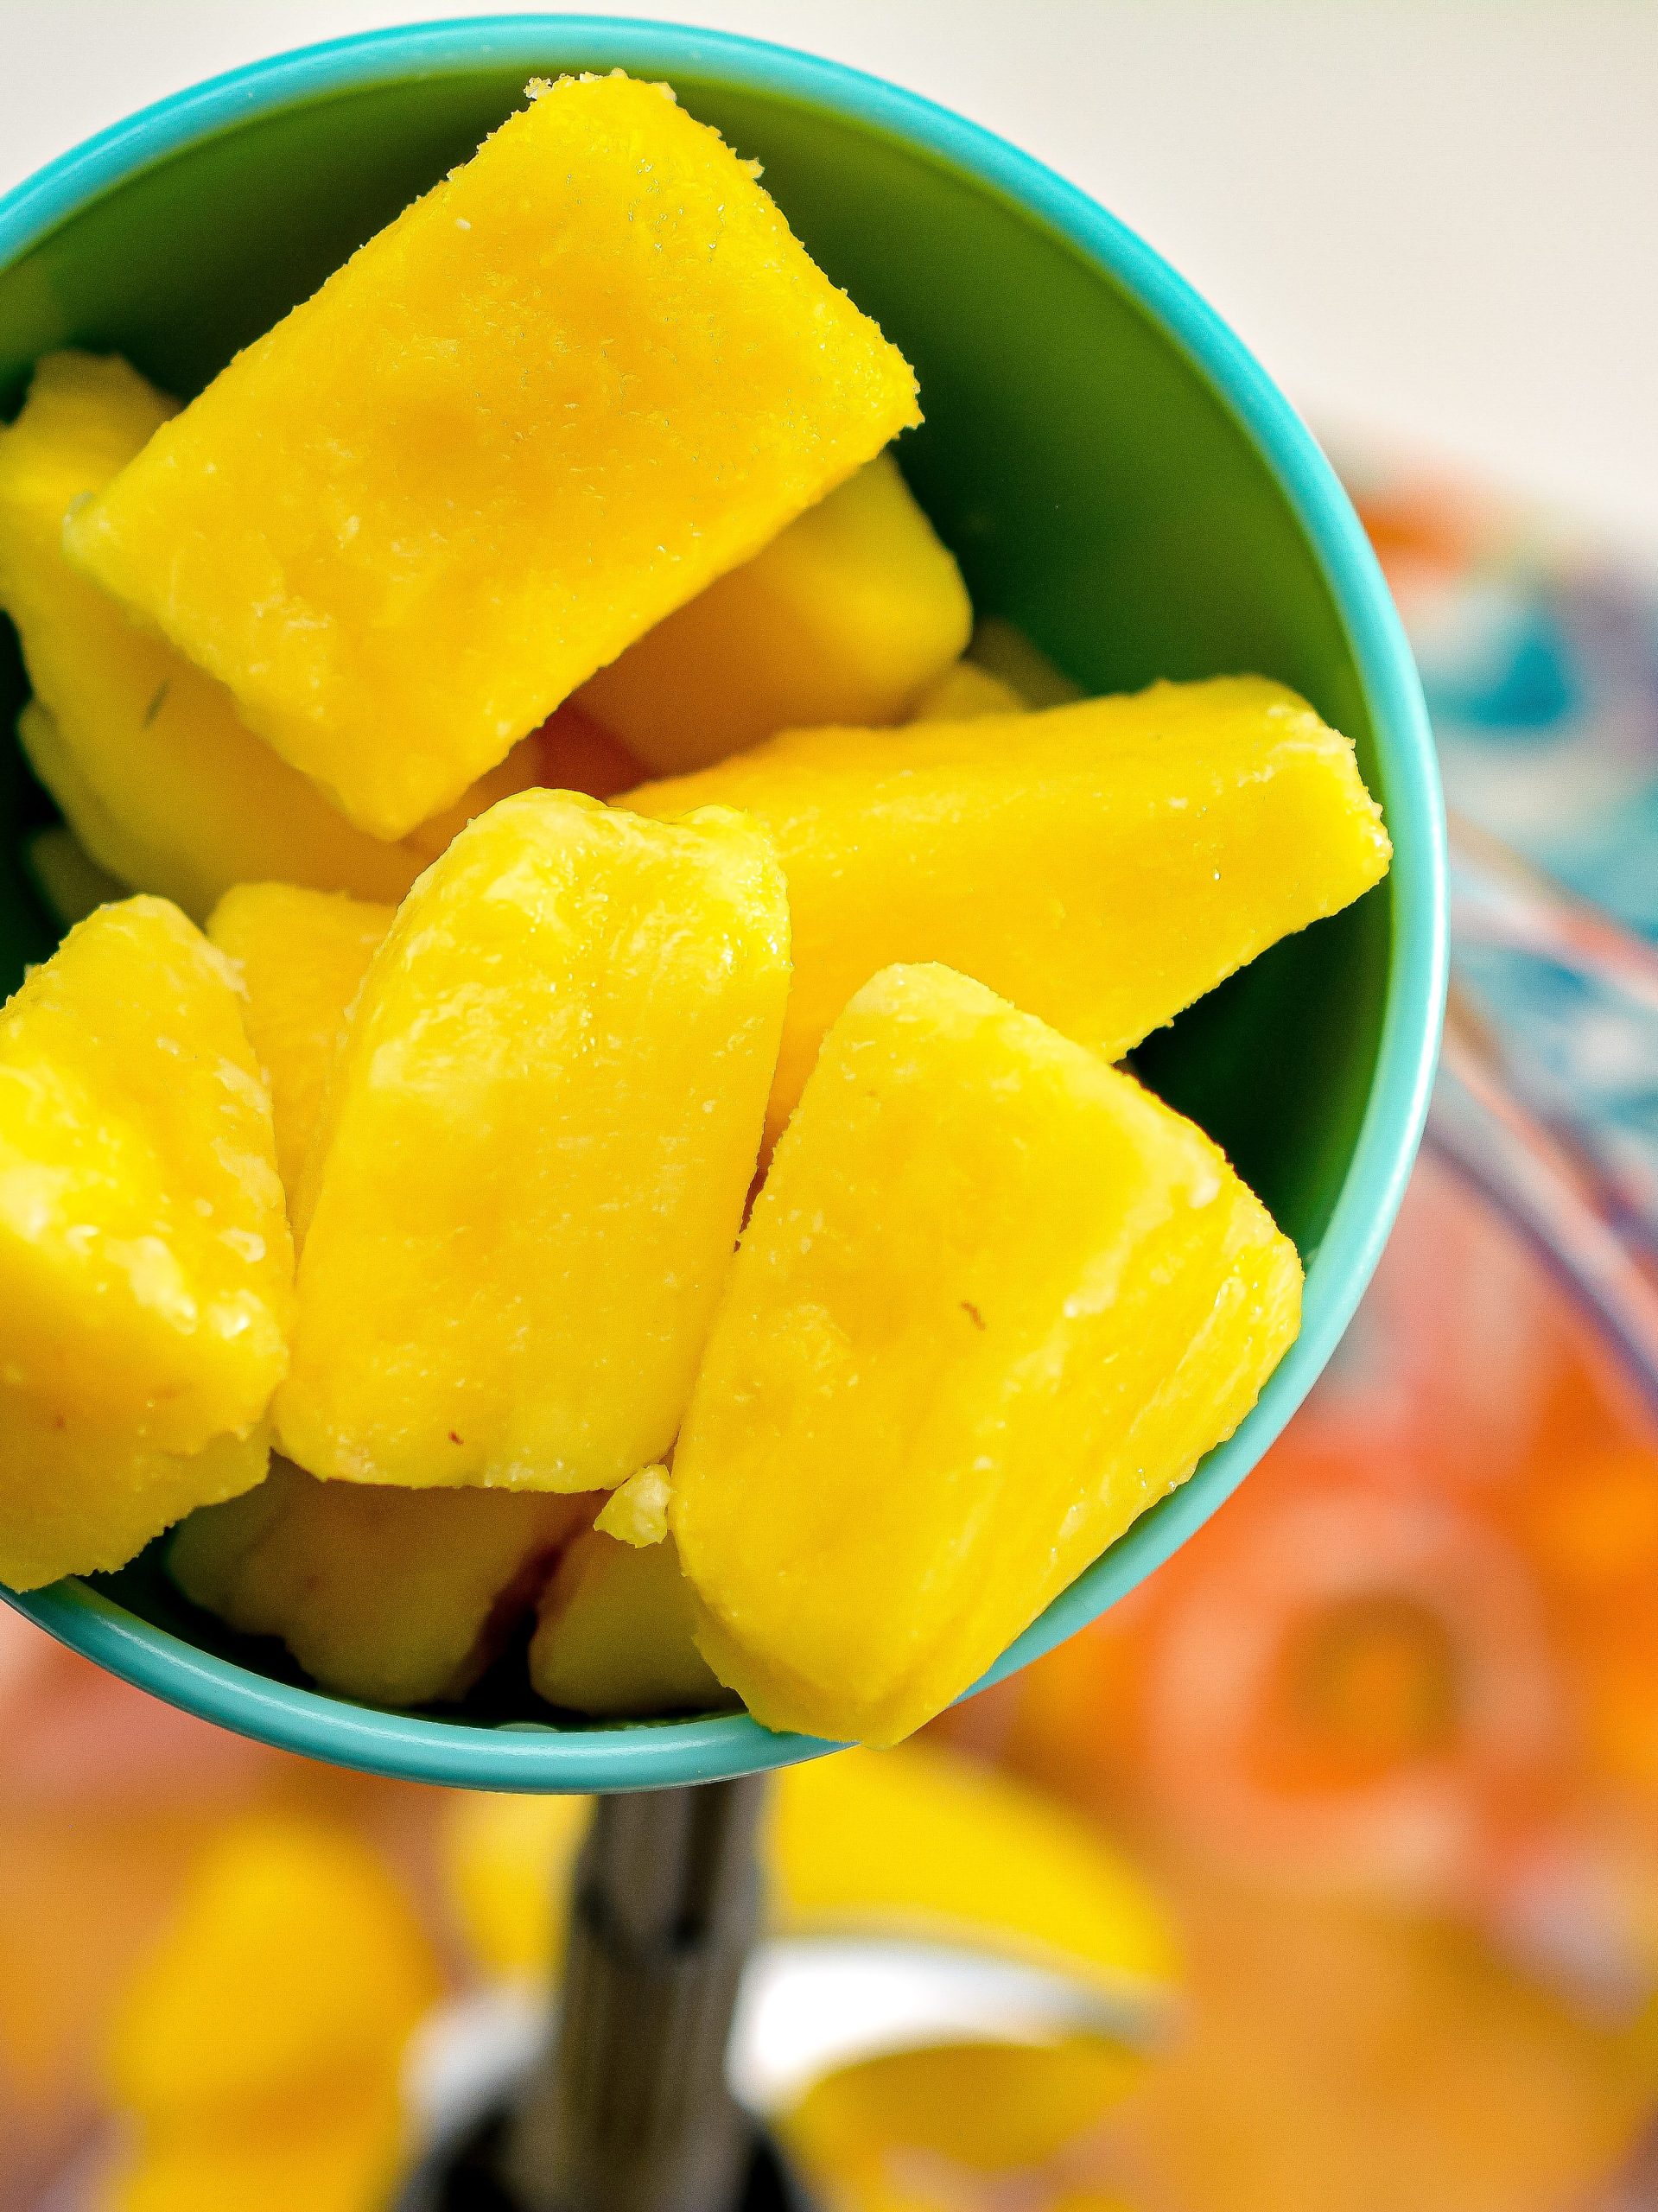 Start by adding 3 cups of frozen pineapple chunks into a blender or food processor.